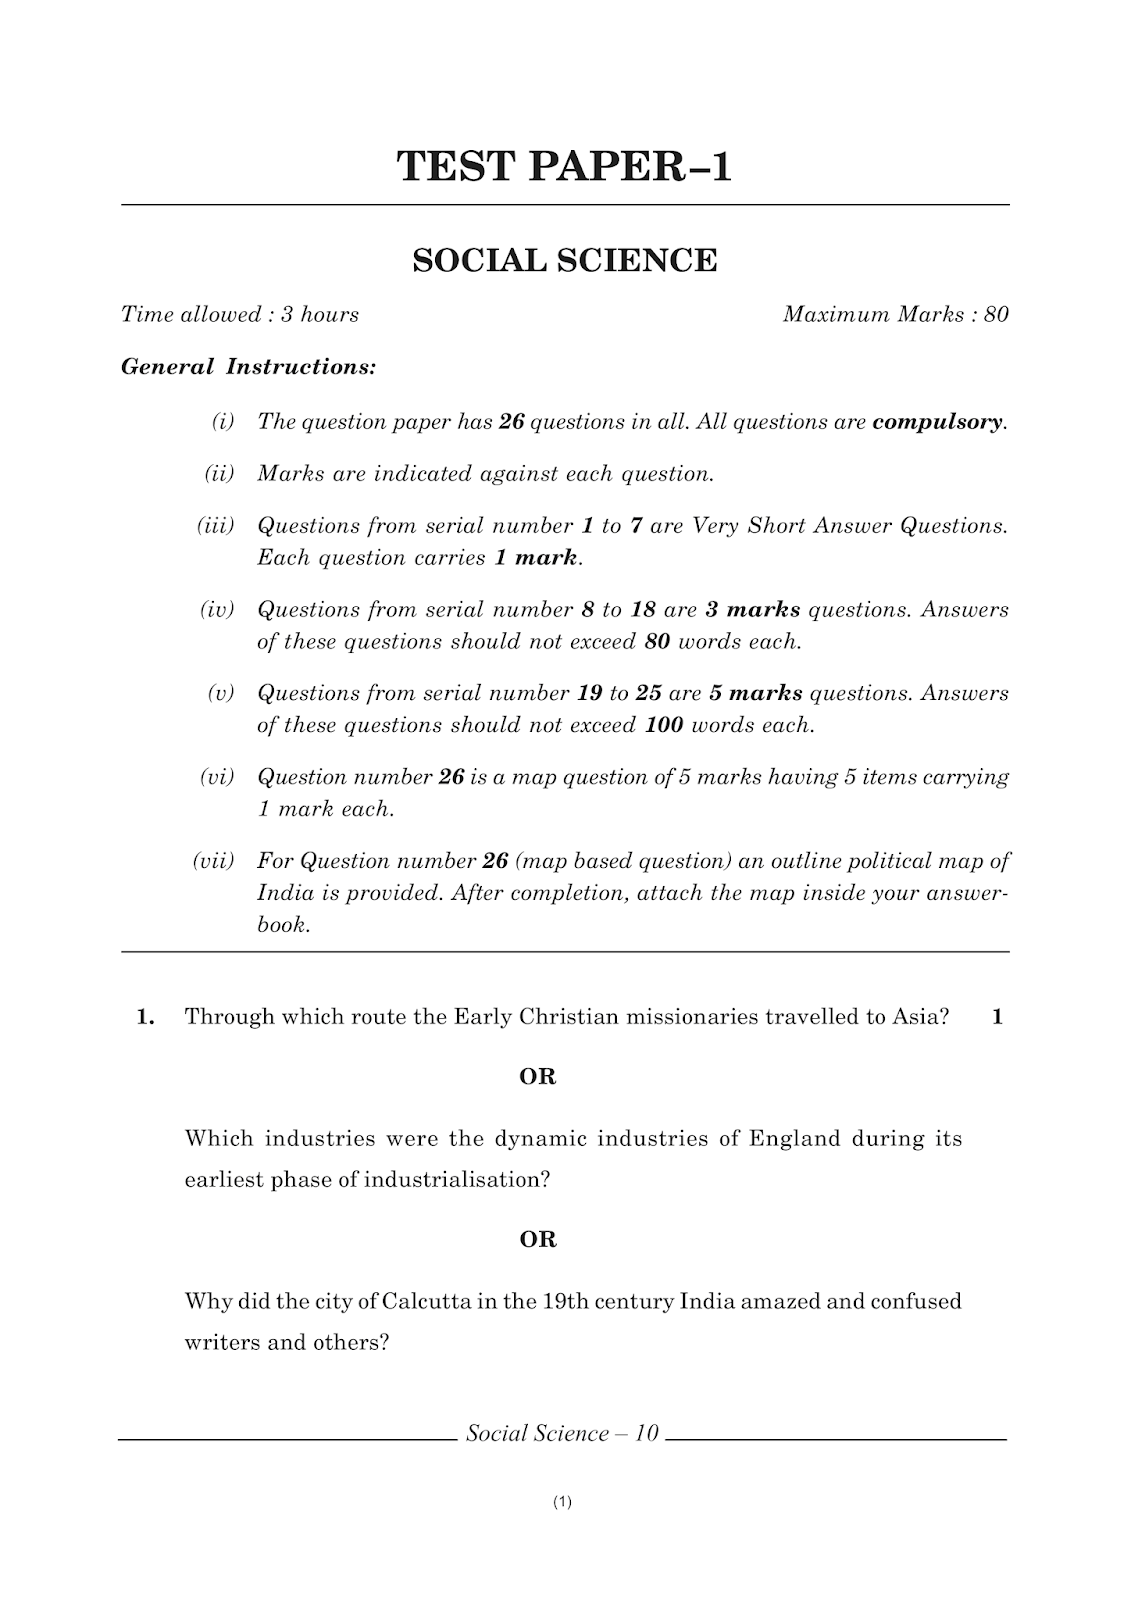 case study questions of social science class 10